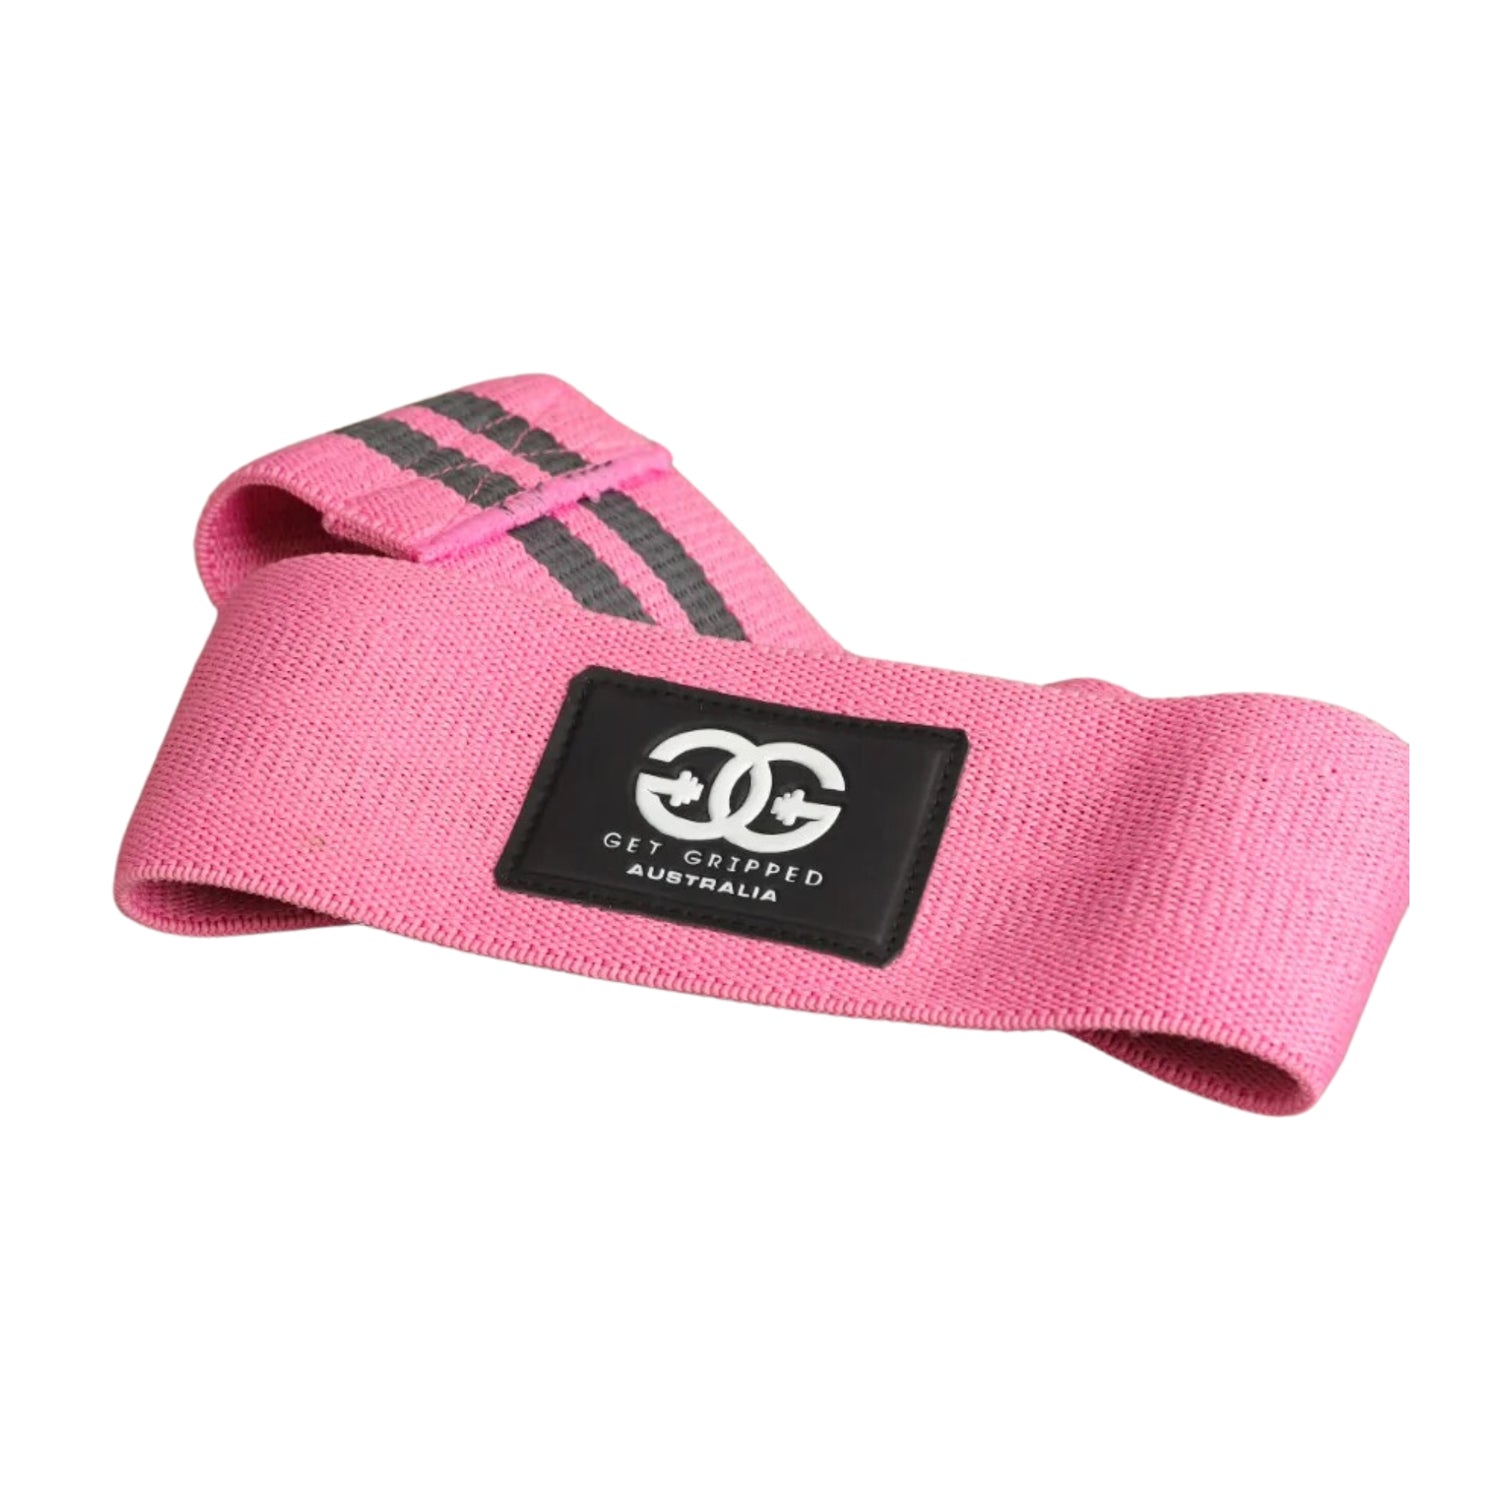 Get Gripped Booty Bands Pink